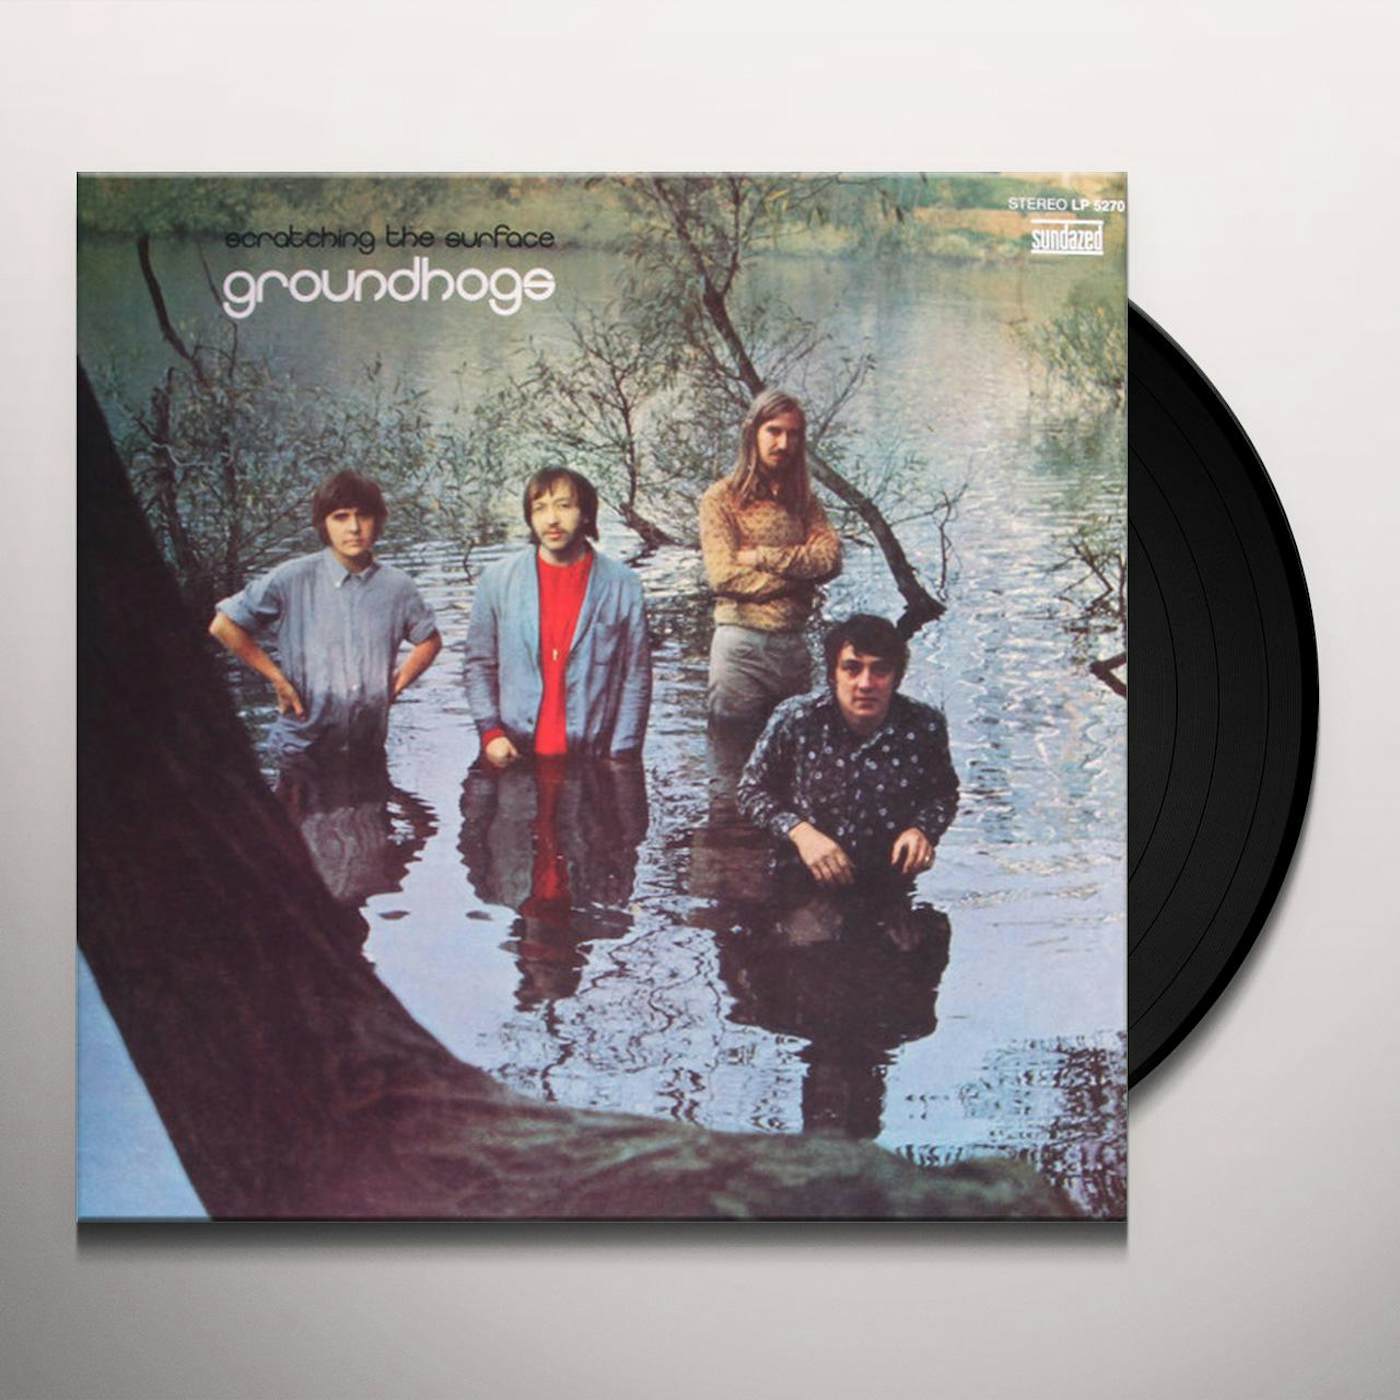 The Groundhogs Scratching The Surface Vinyl Record